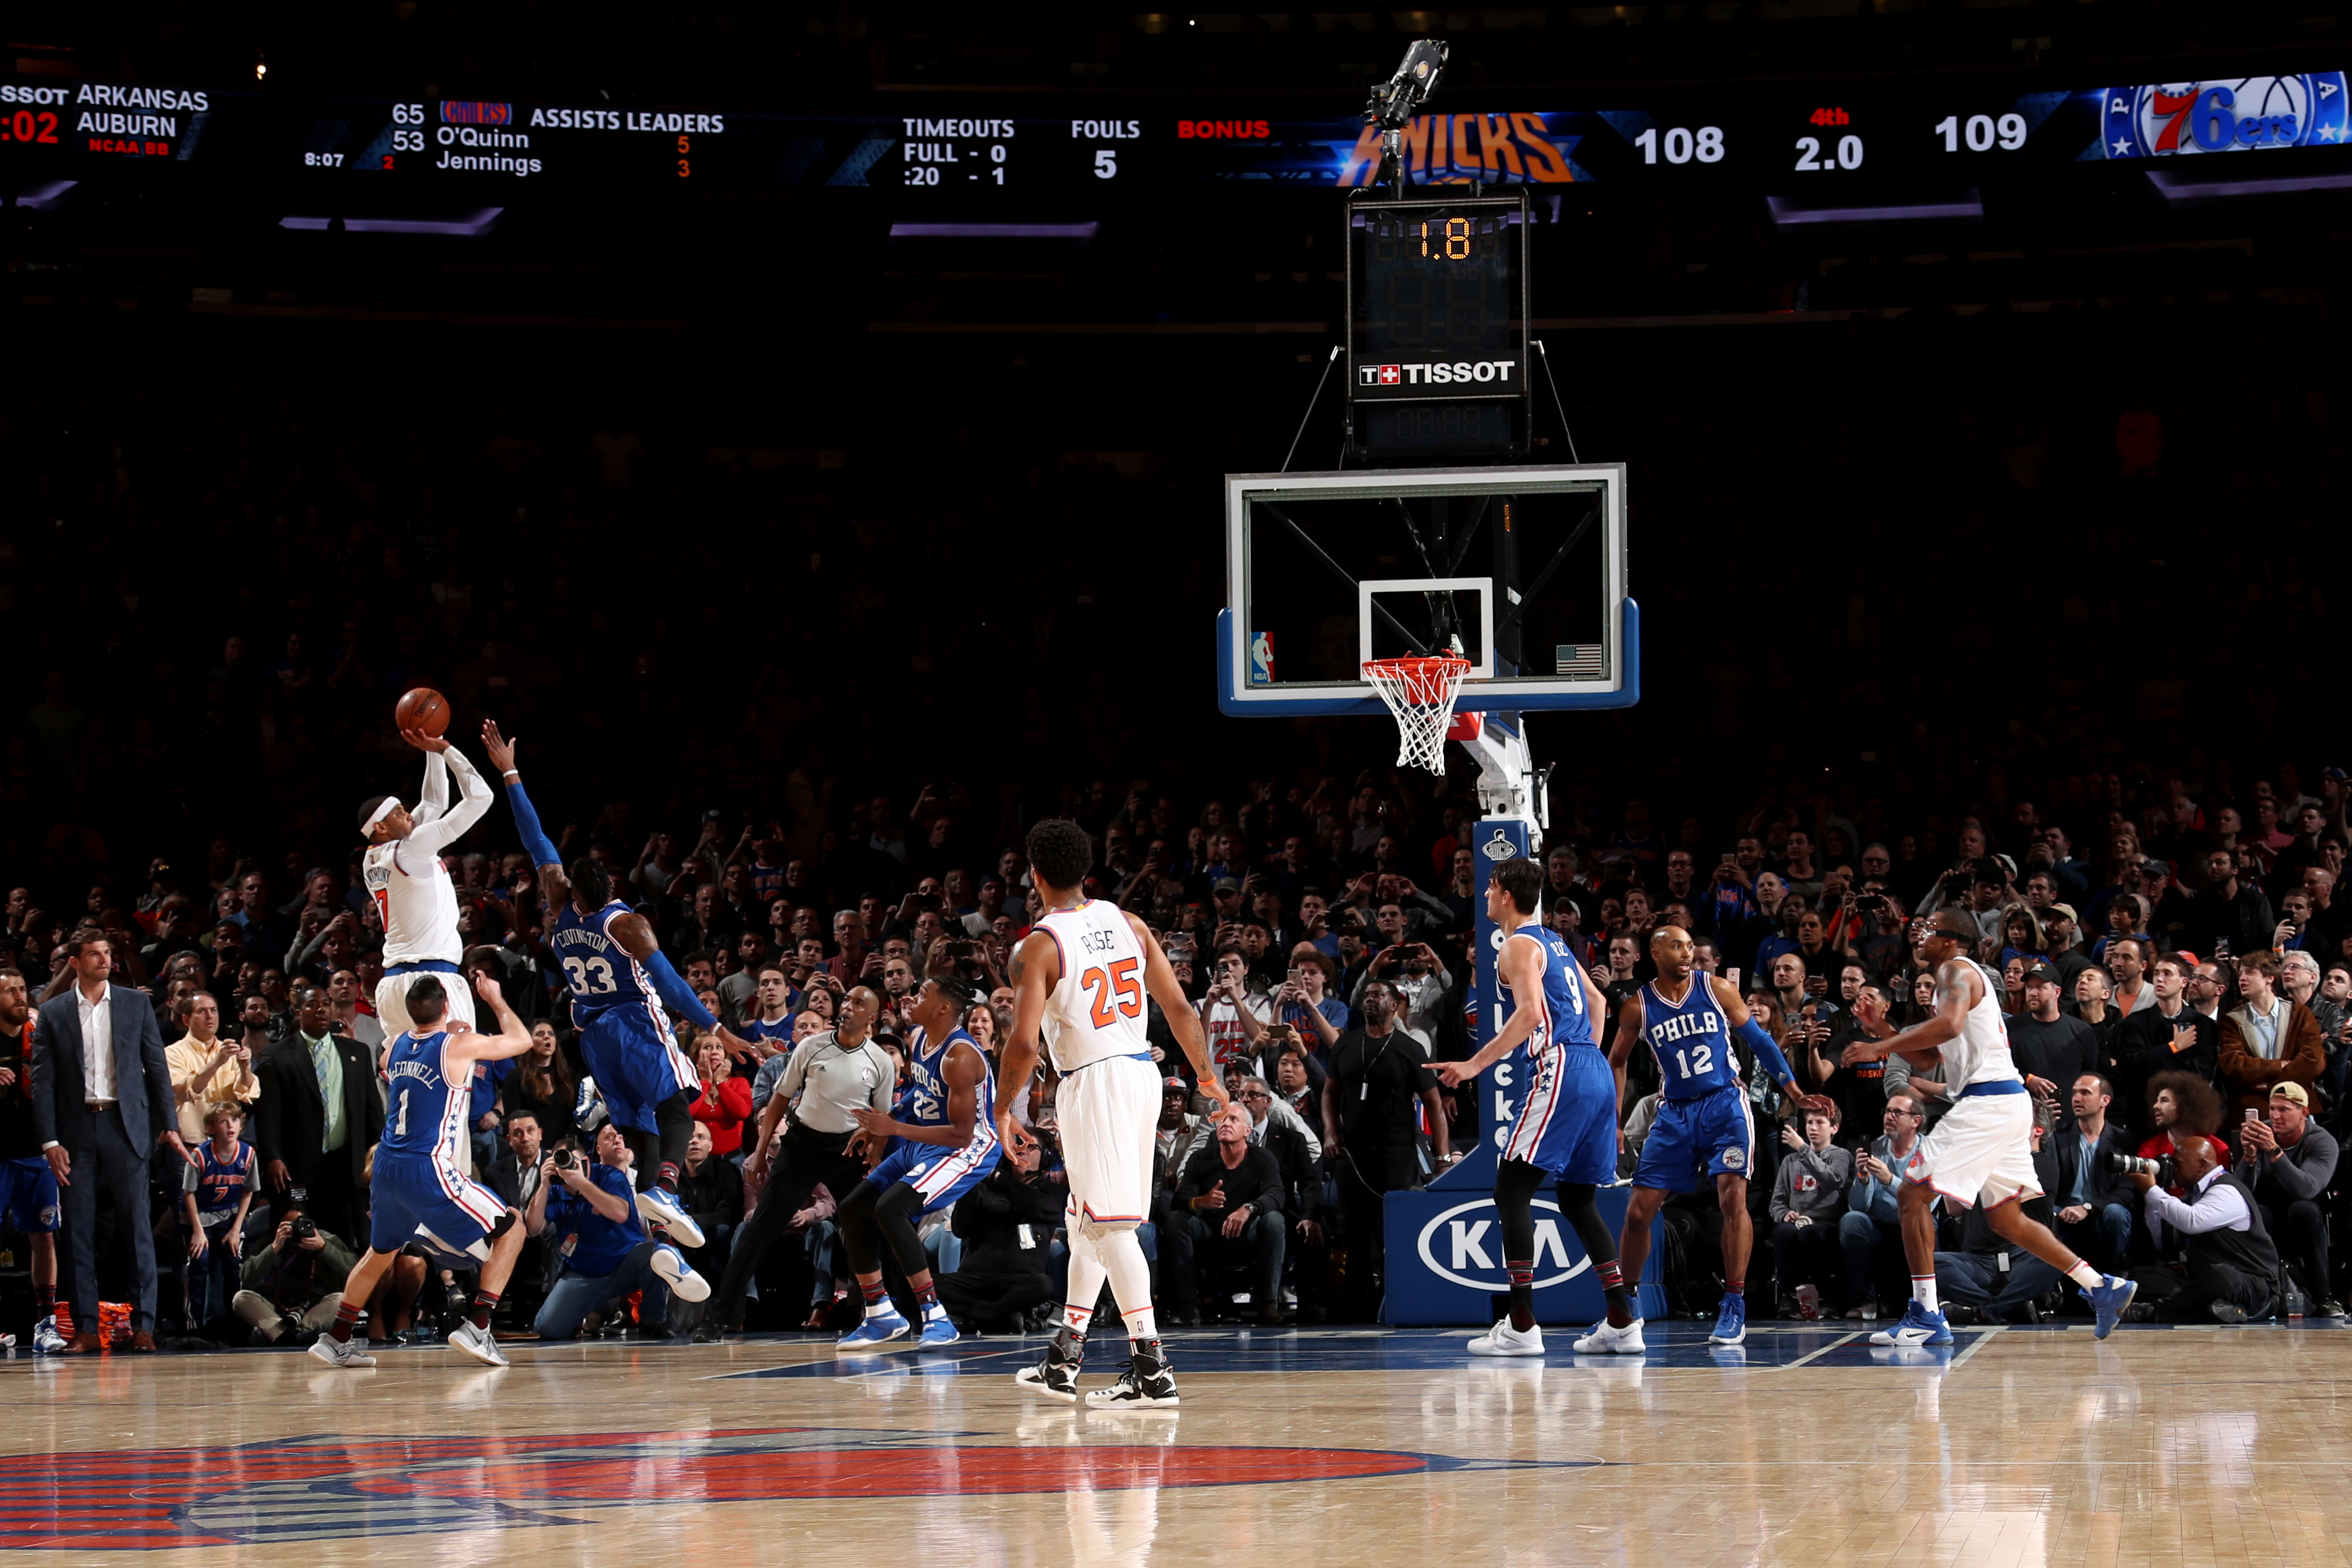 NEW YORK, NY - FEBRUARY 25: Carmelo Anthony #7 of the New York Knicks shoots the ball to win the game against the Philadelphia 76ers on February 25, 2017 at Madison Square Garden in New York City, New York. NOTE TO USER: User expressly acknowledges and agrees that, by downloading and or using this photograph, User is consenting to the terms and conditions of the Getty Images License Agreement. Mandatory Copyright Notice: Copyright 2017 NBAE (Photo by Nathaniel S. Butler/NBAE via Getty Images)